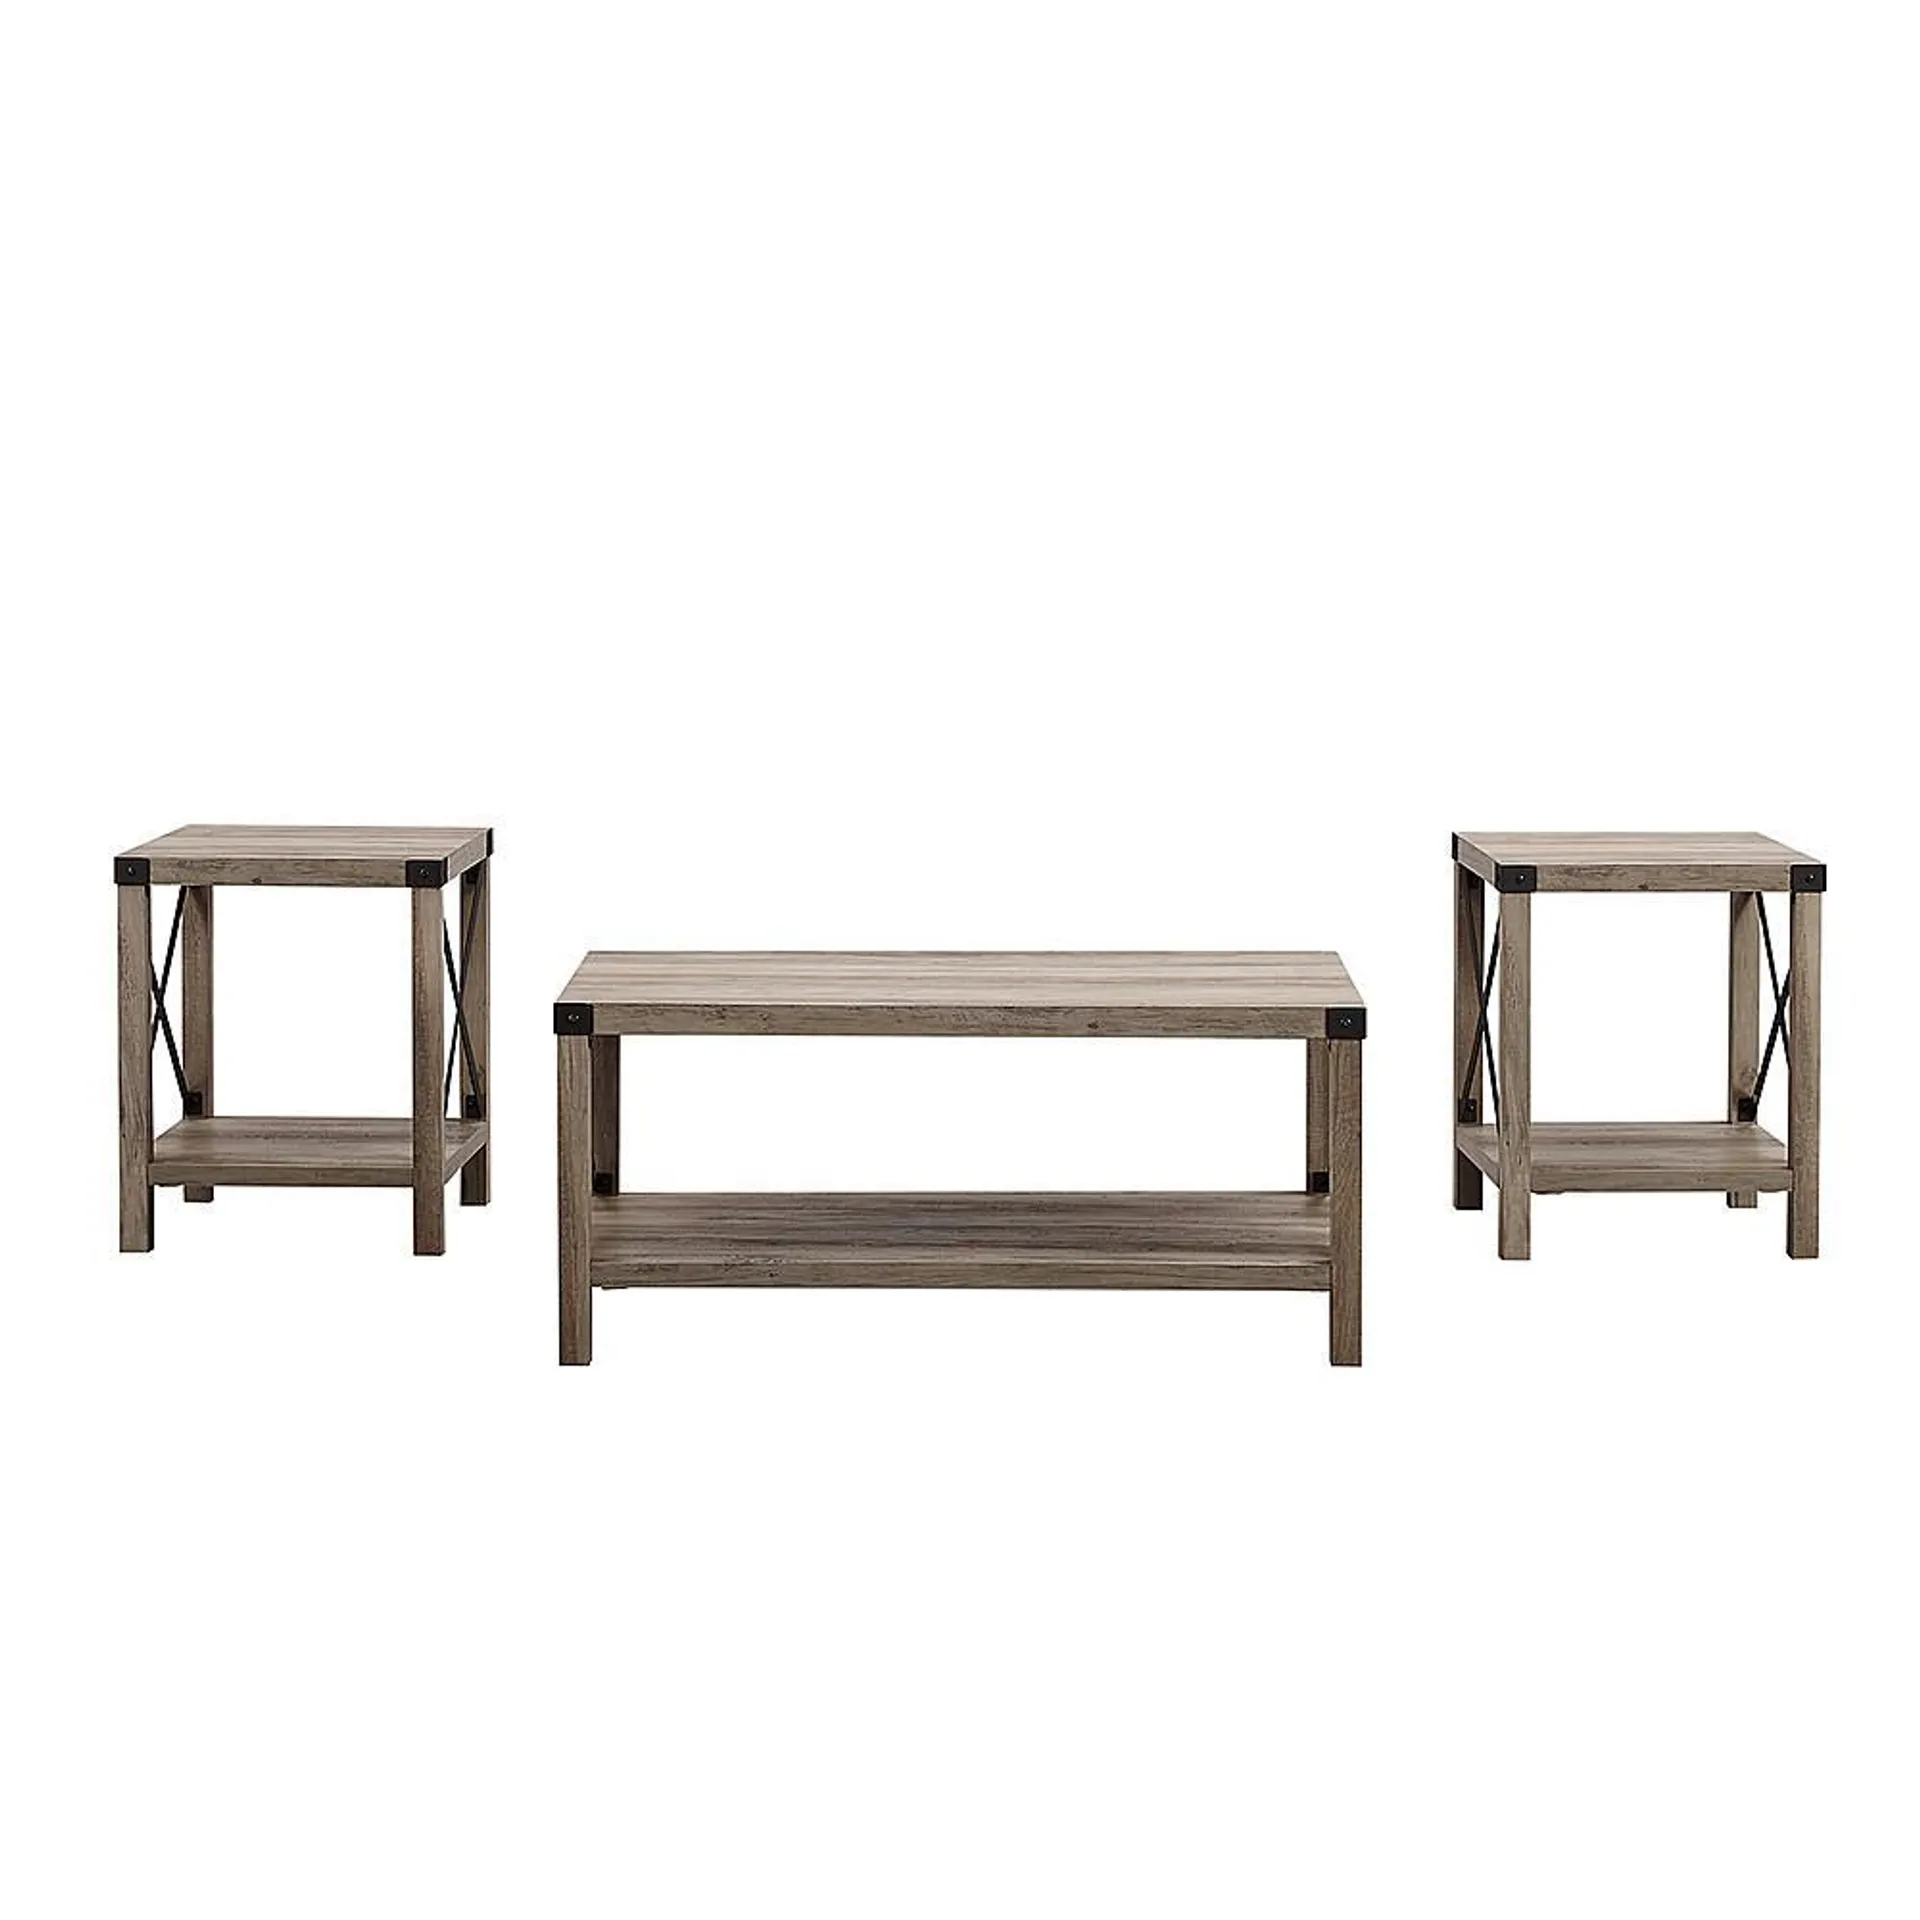 Walker Edison - 3-Piece Rustic Wood and Metal Accent Table Set - Grey Wash/Black